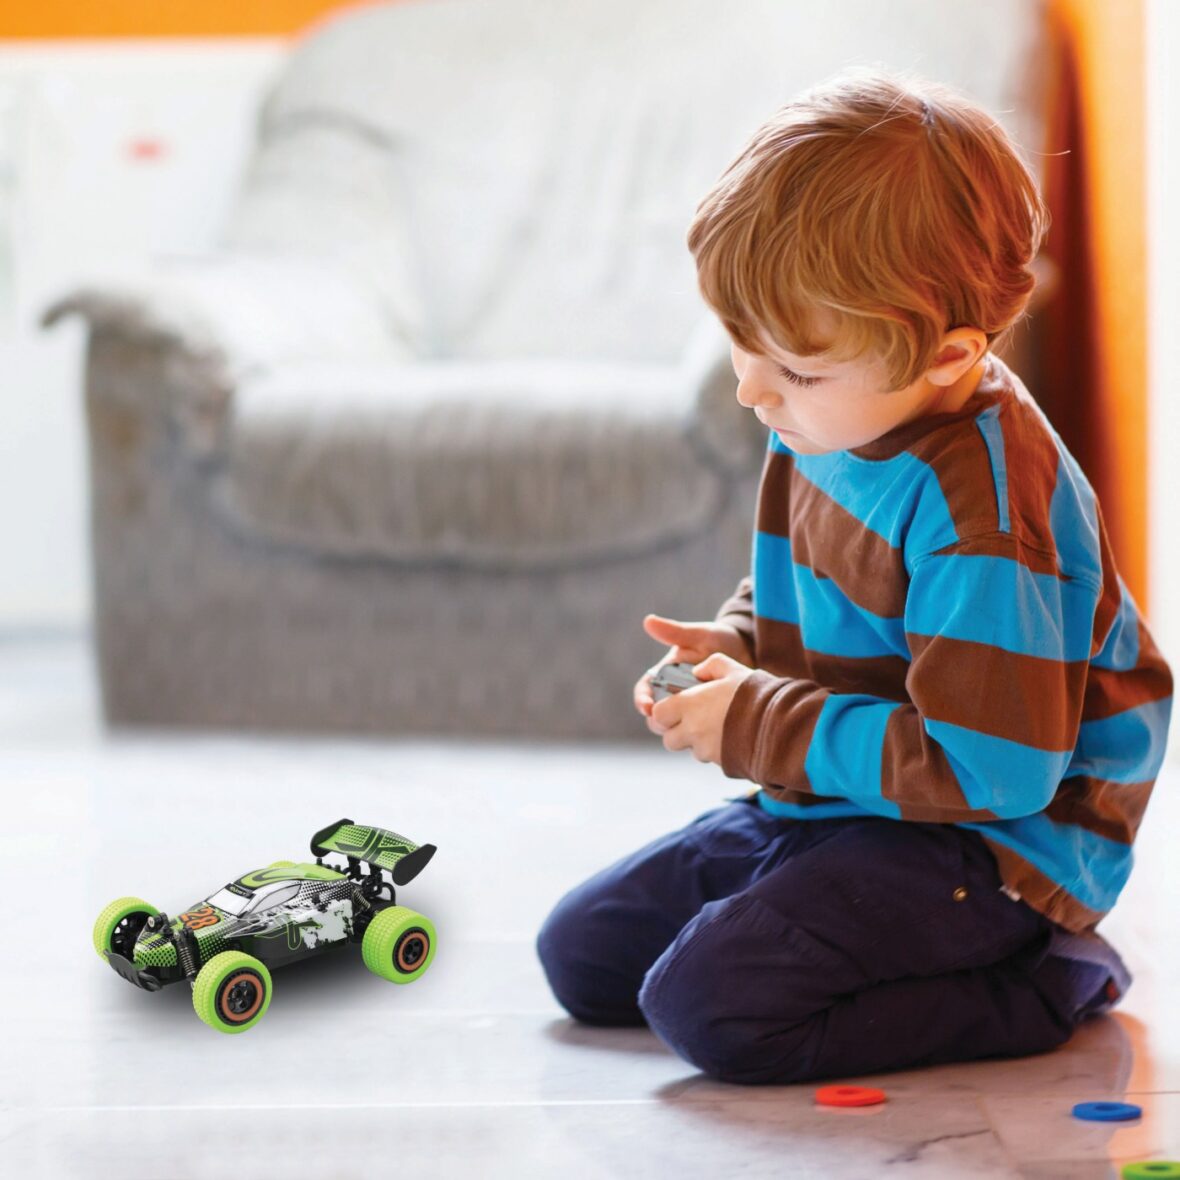 Little,Blond,Boy,Playing,With,Robot,Toy,At,Home,,Indoor